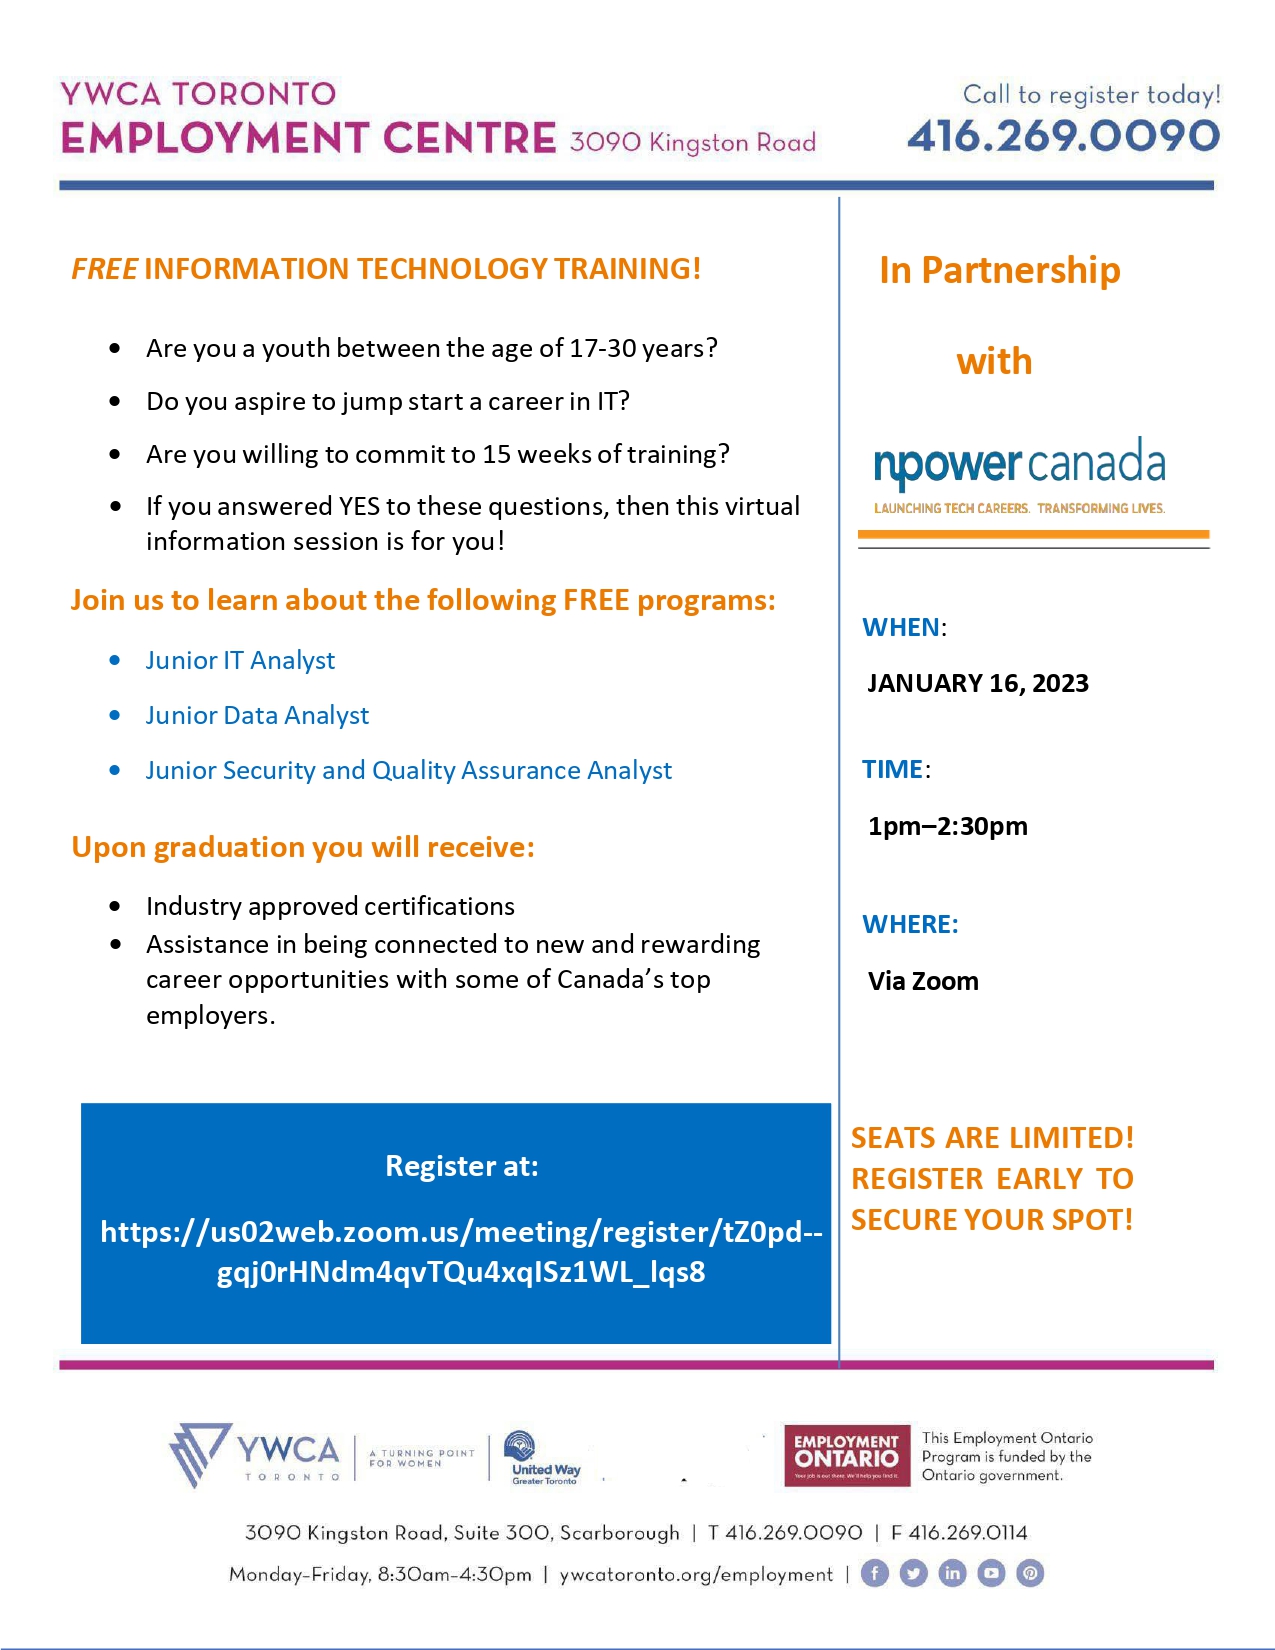 NPower Information Session Flyer